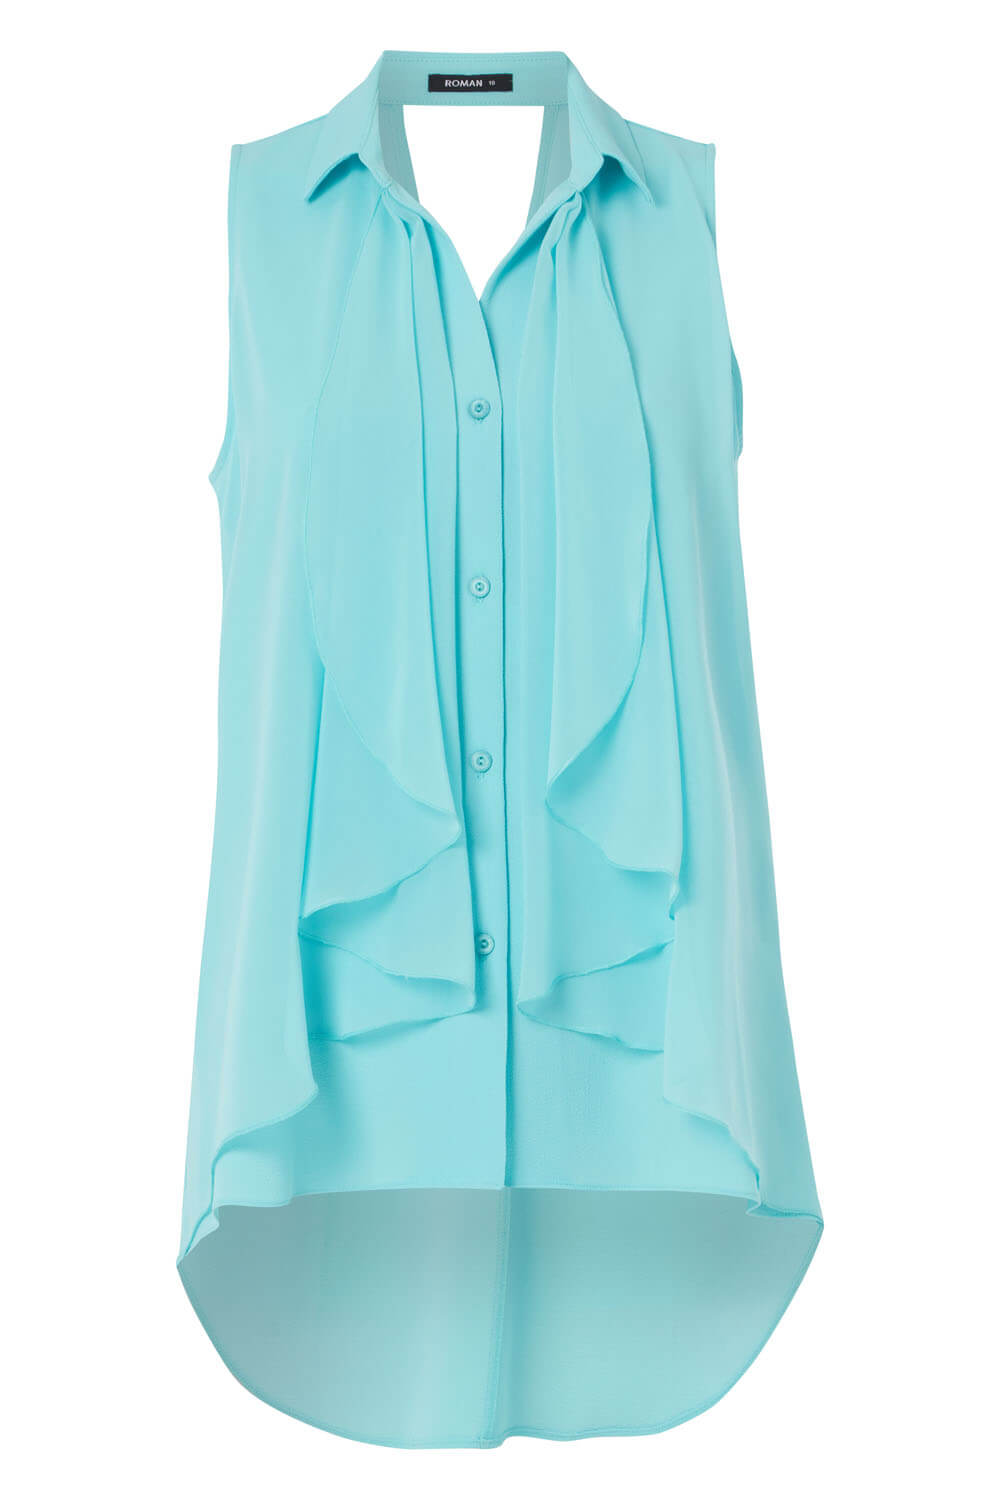 Aqua Waterfall Front Button Up Blouse, Image 5 of 5